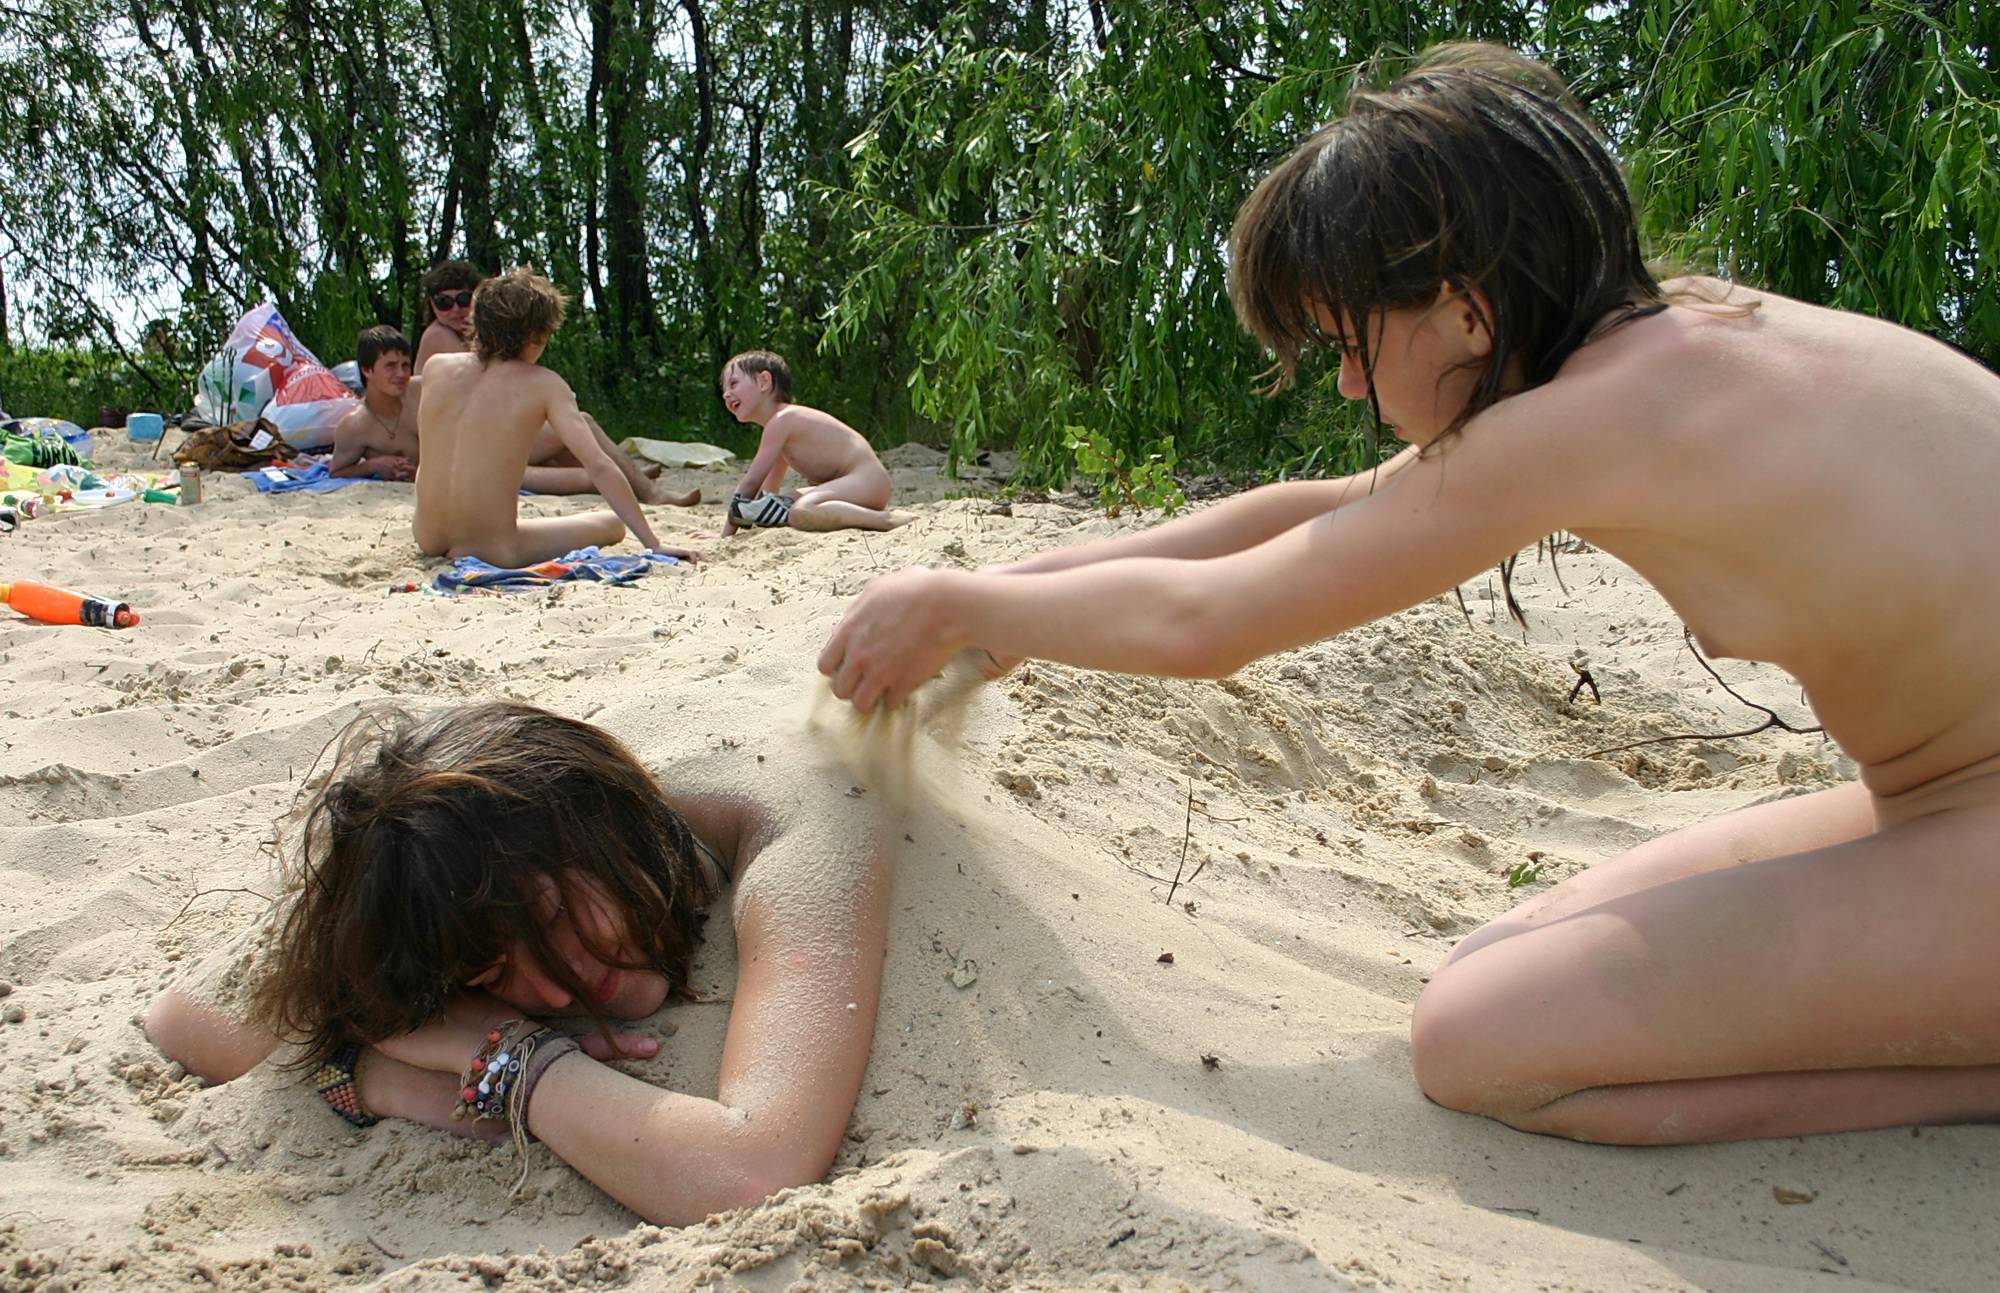 Pure Nudism Gallery Cover Me Up in This Sand - 2